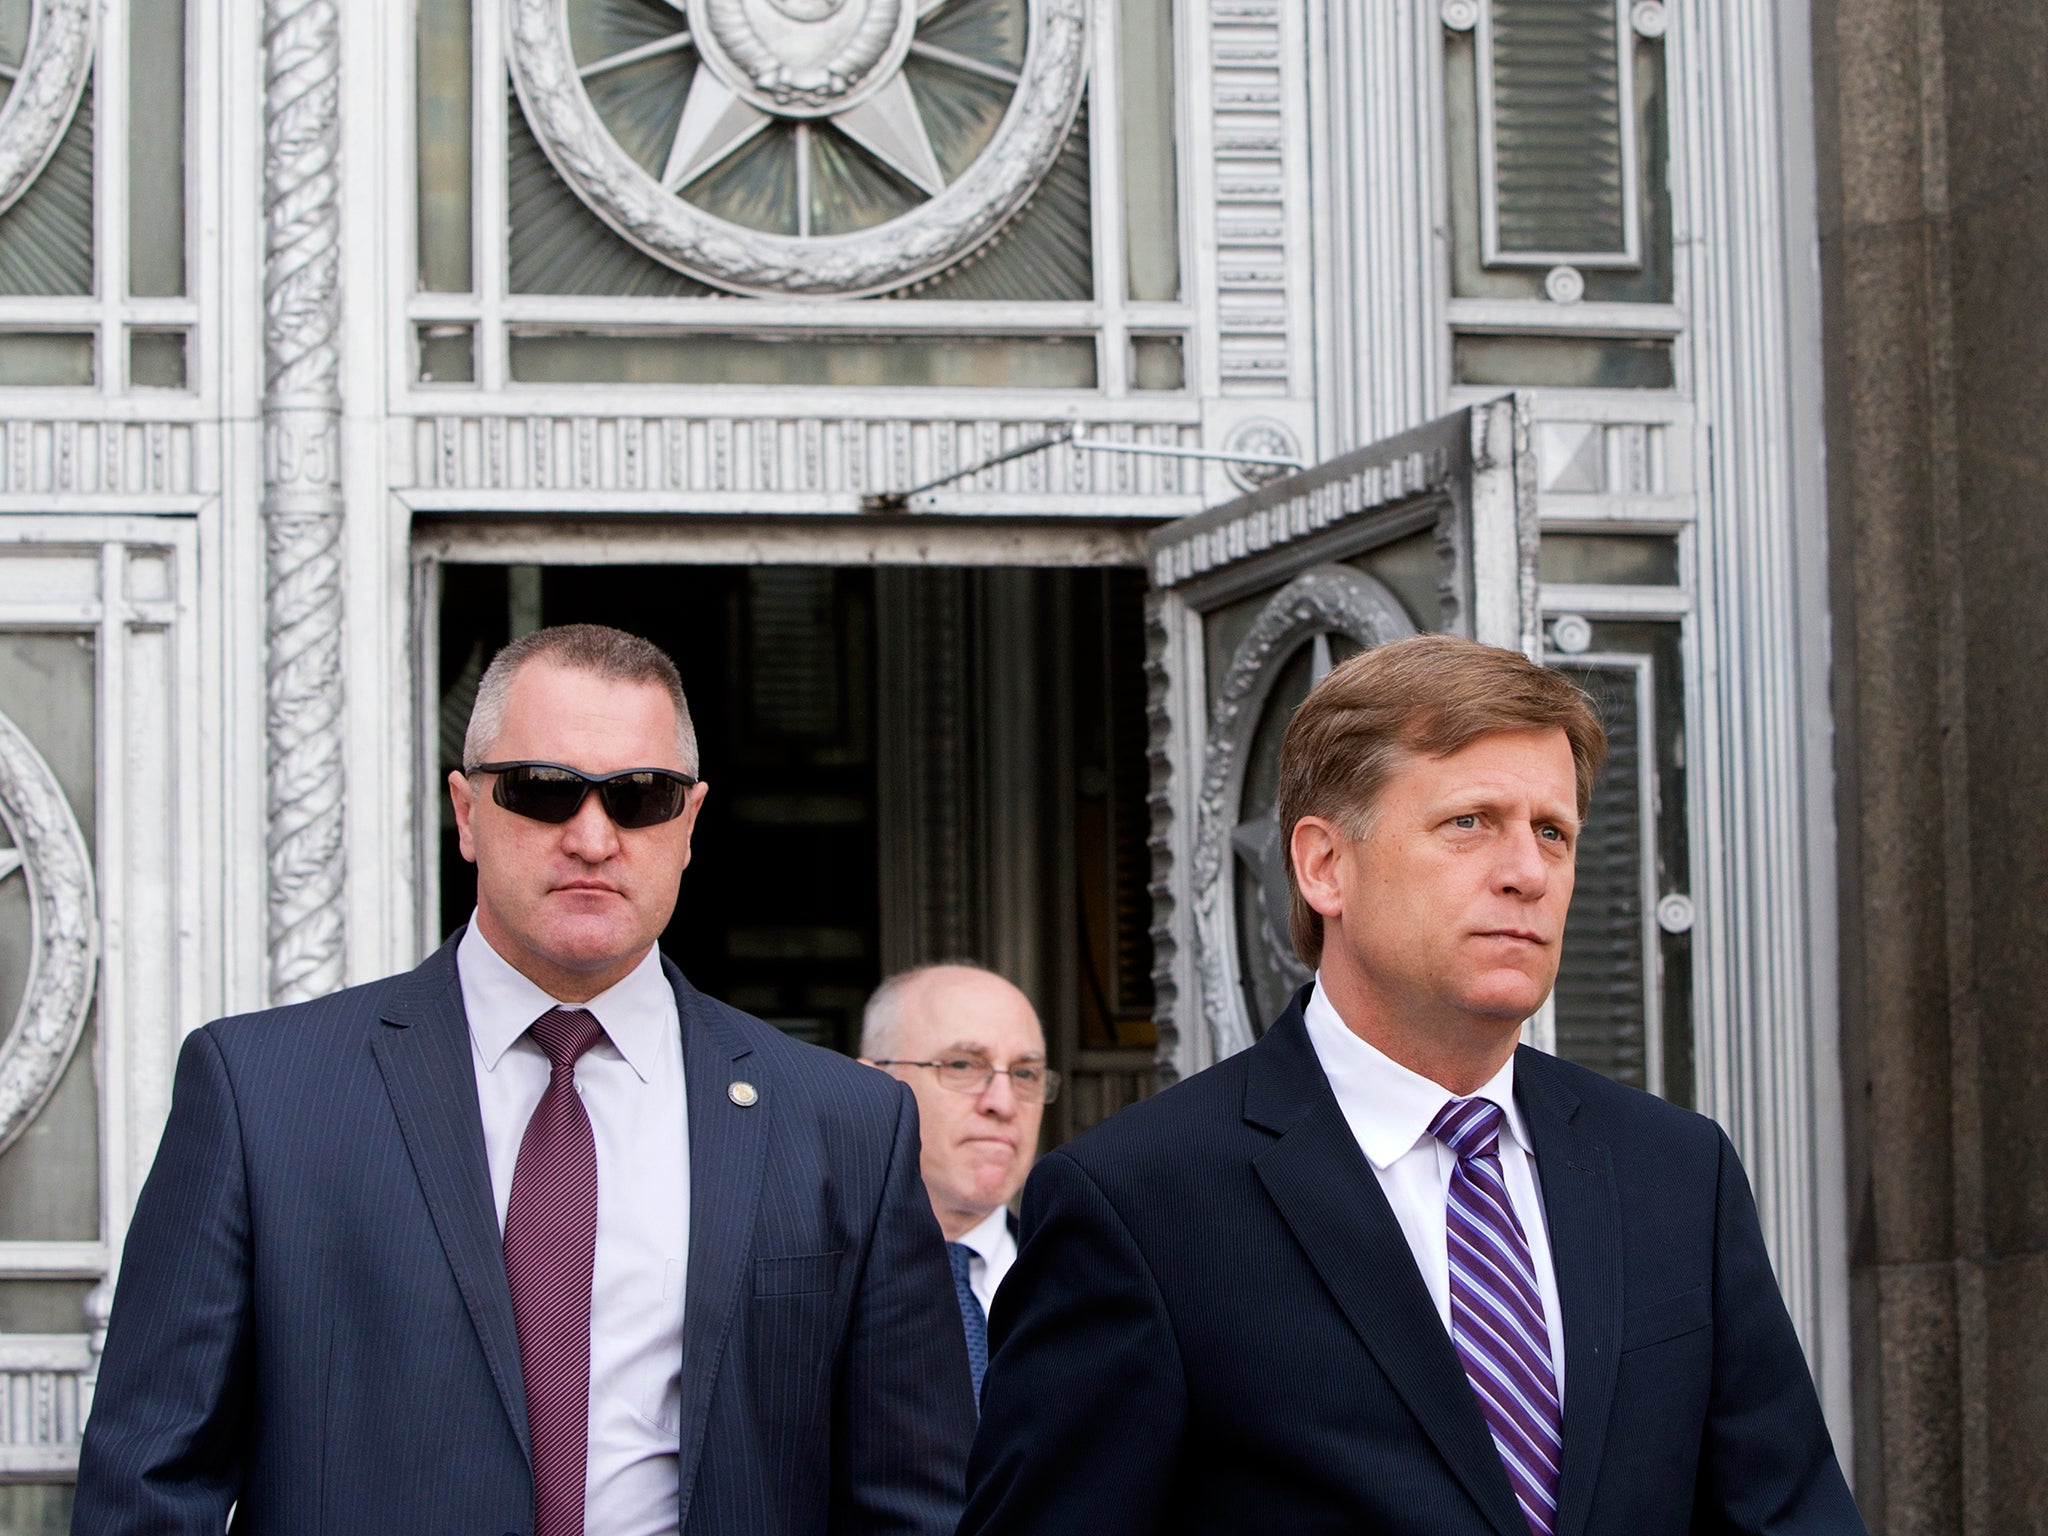 Michael McFaul (right) leaves the Russian Foreign Ministry headquarters in Moscow in 2013